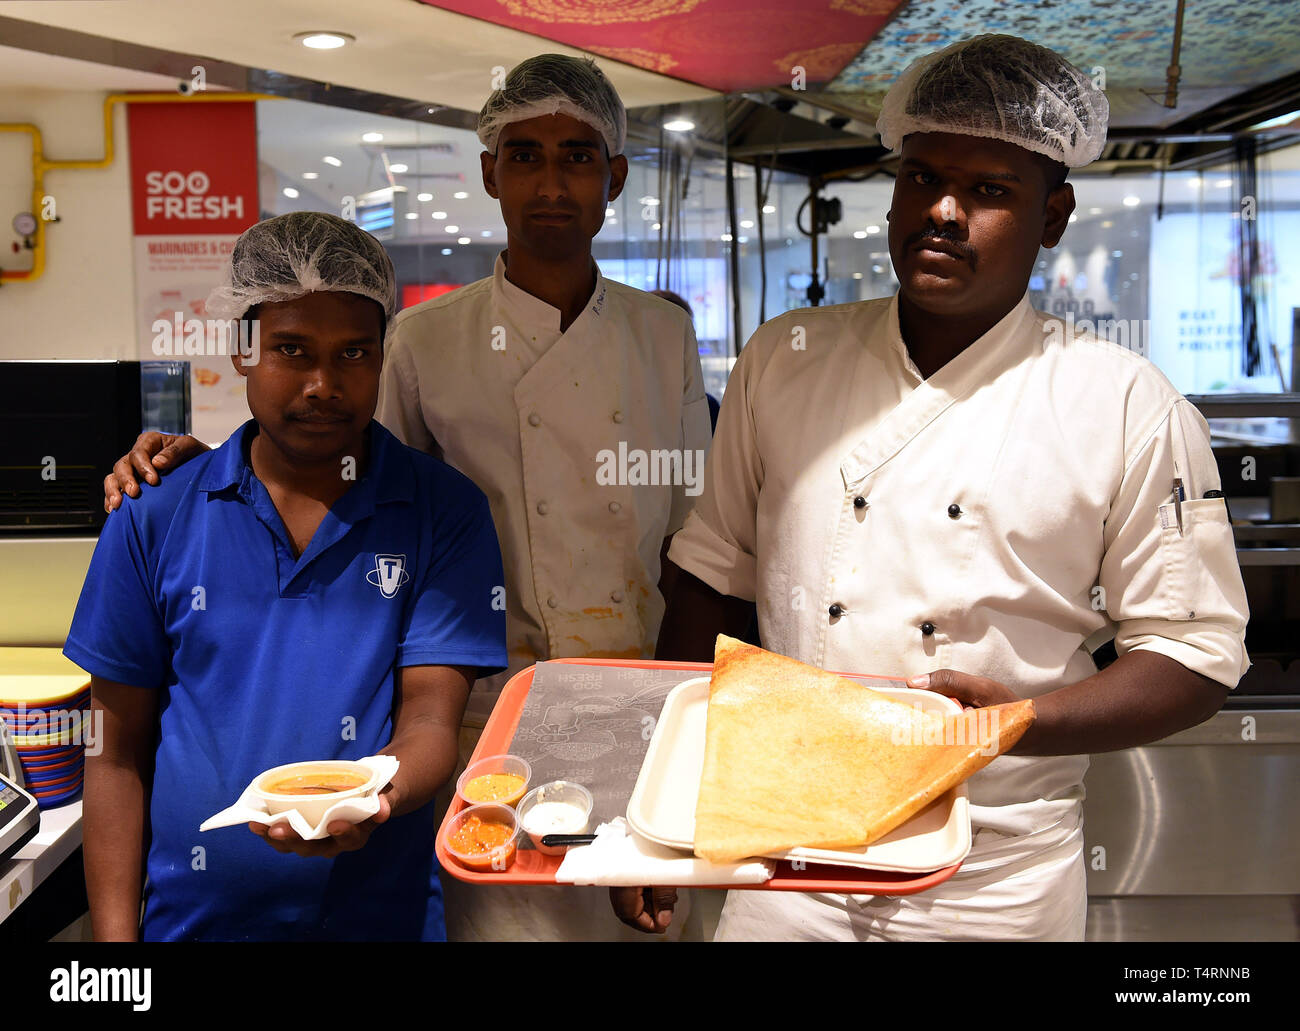 New Delhi, India. 18th Apr, 2019. An Indian chef shows Dosa he made at a supermarket in New Delhi, India, April 18, 2019. Dosa, a crispy paper-thin wrap with a spicy potato filling, eaten dipped in a tangy soup and a special sauce or chutney, is popular in southern India. Credit: Zhang Naijie/Xinhua/Alamy Live News Stock Photo